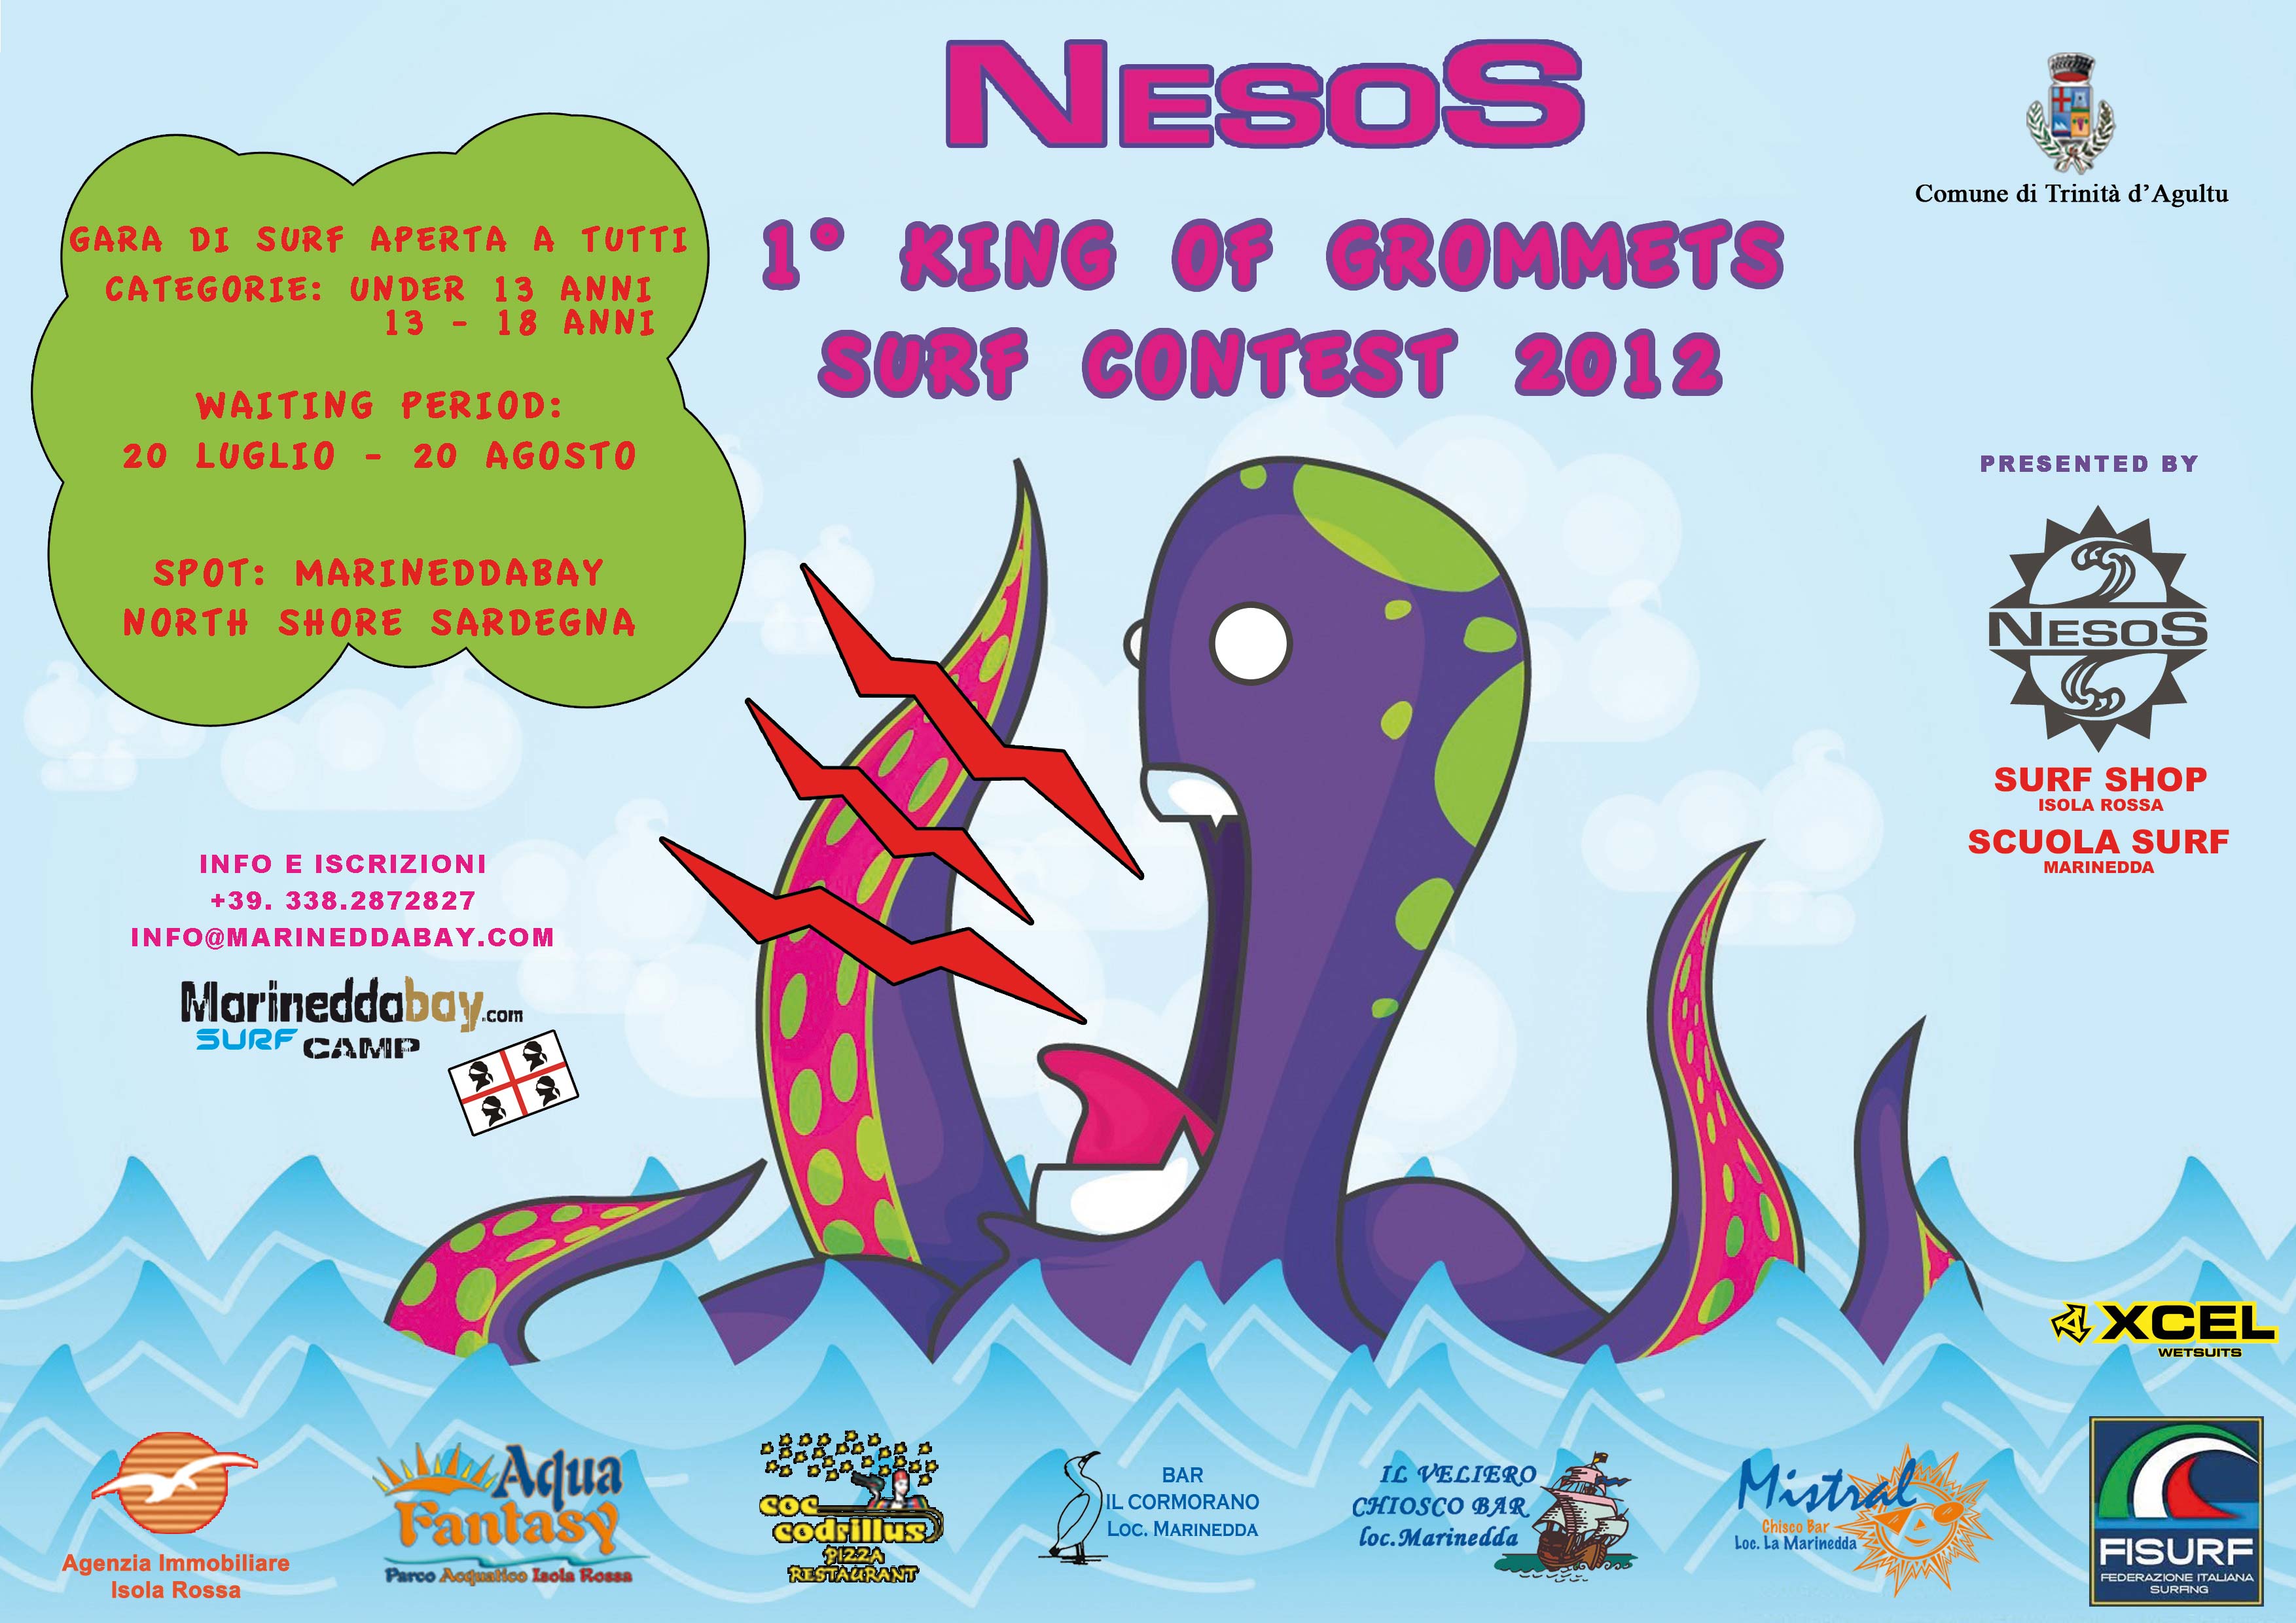 Surf: Semaforo verde per il Nesos king of the grommets surf contest